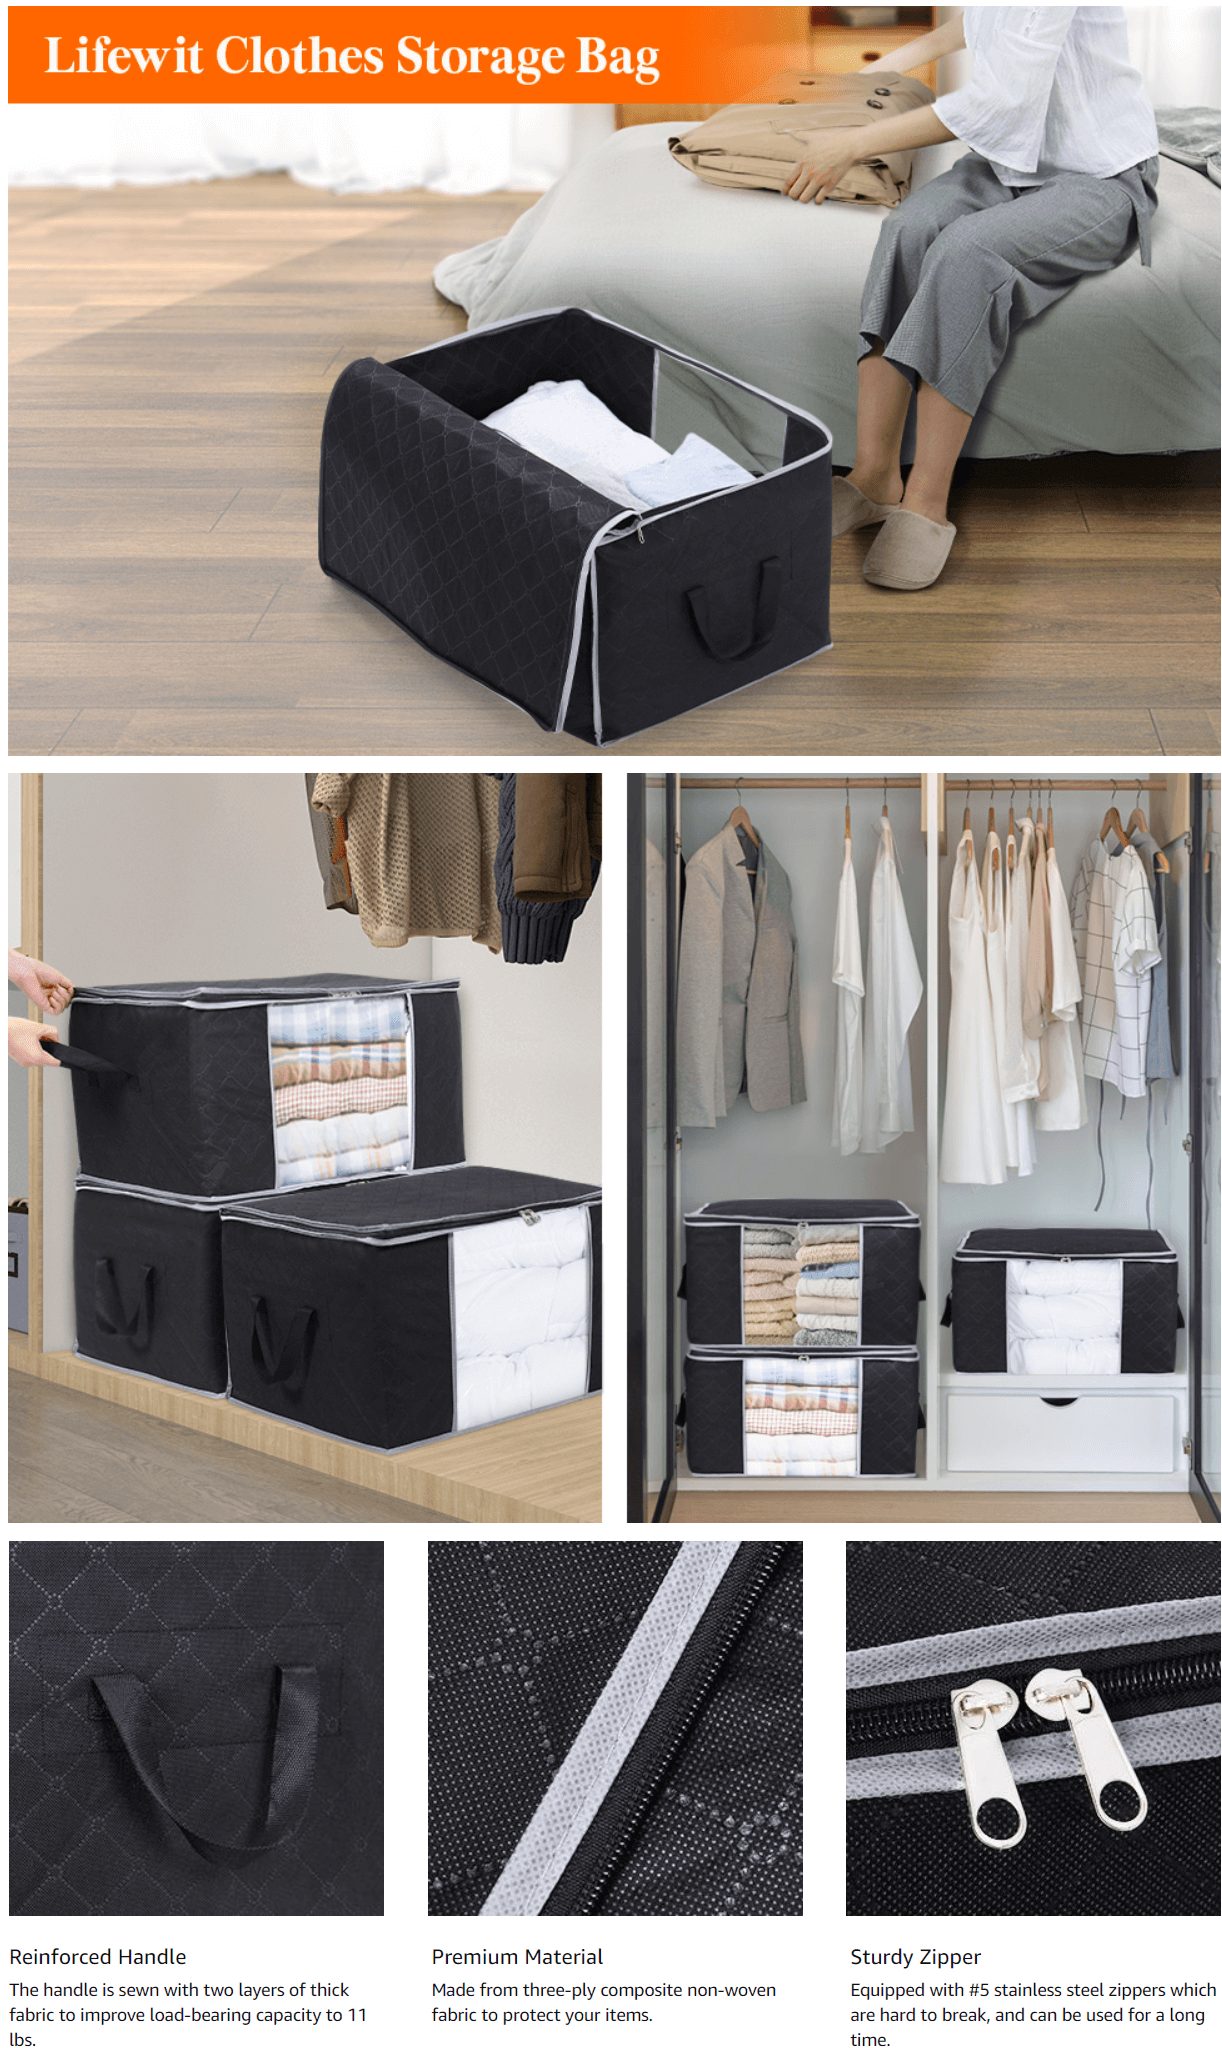 Lifewit Large Capacity Clothes Storage Bag Organizer only $14.44!